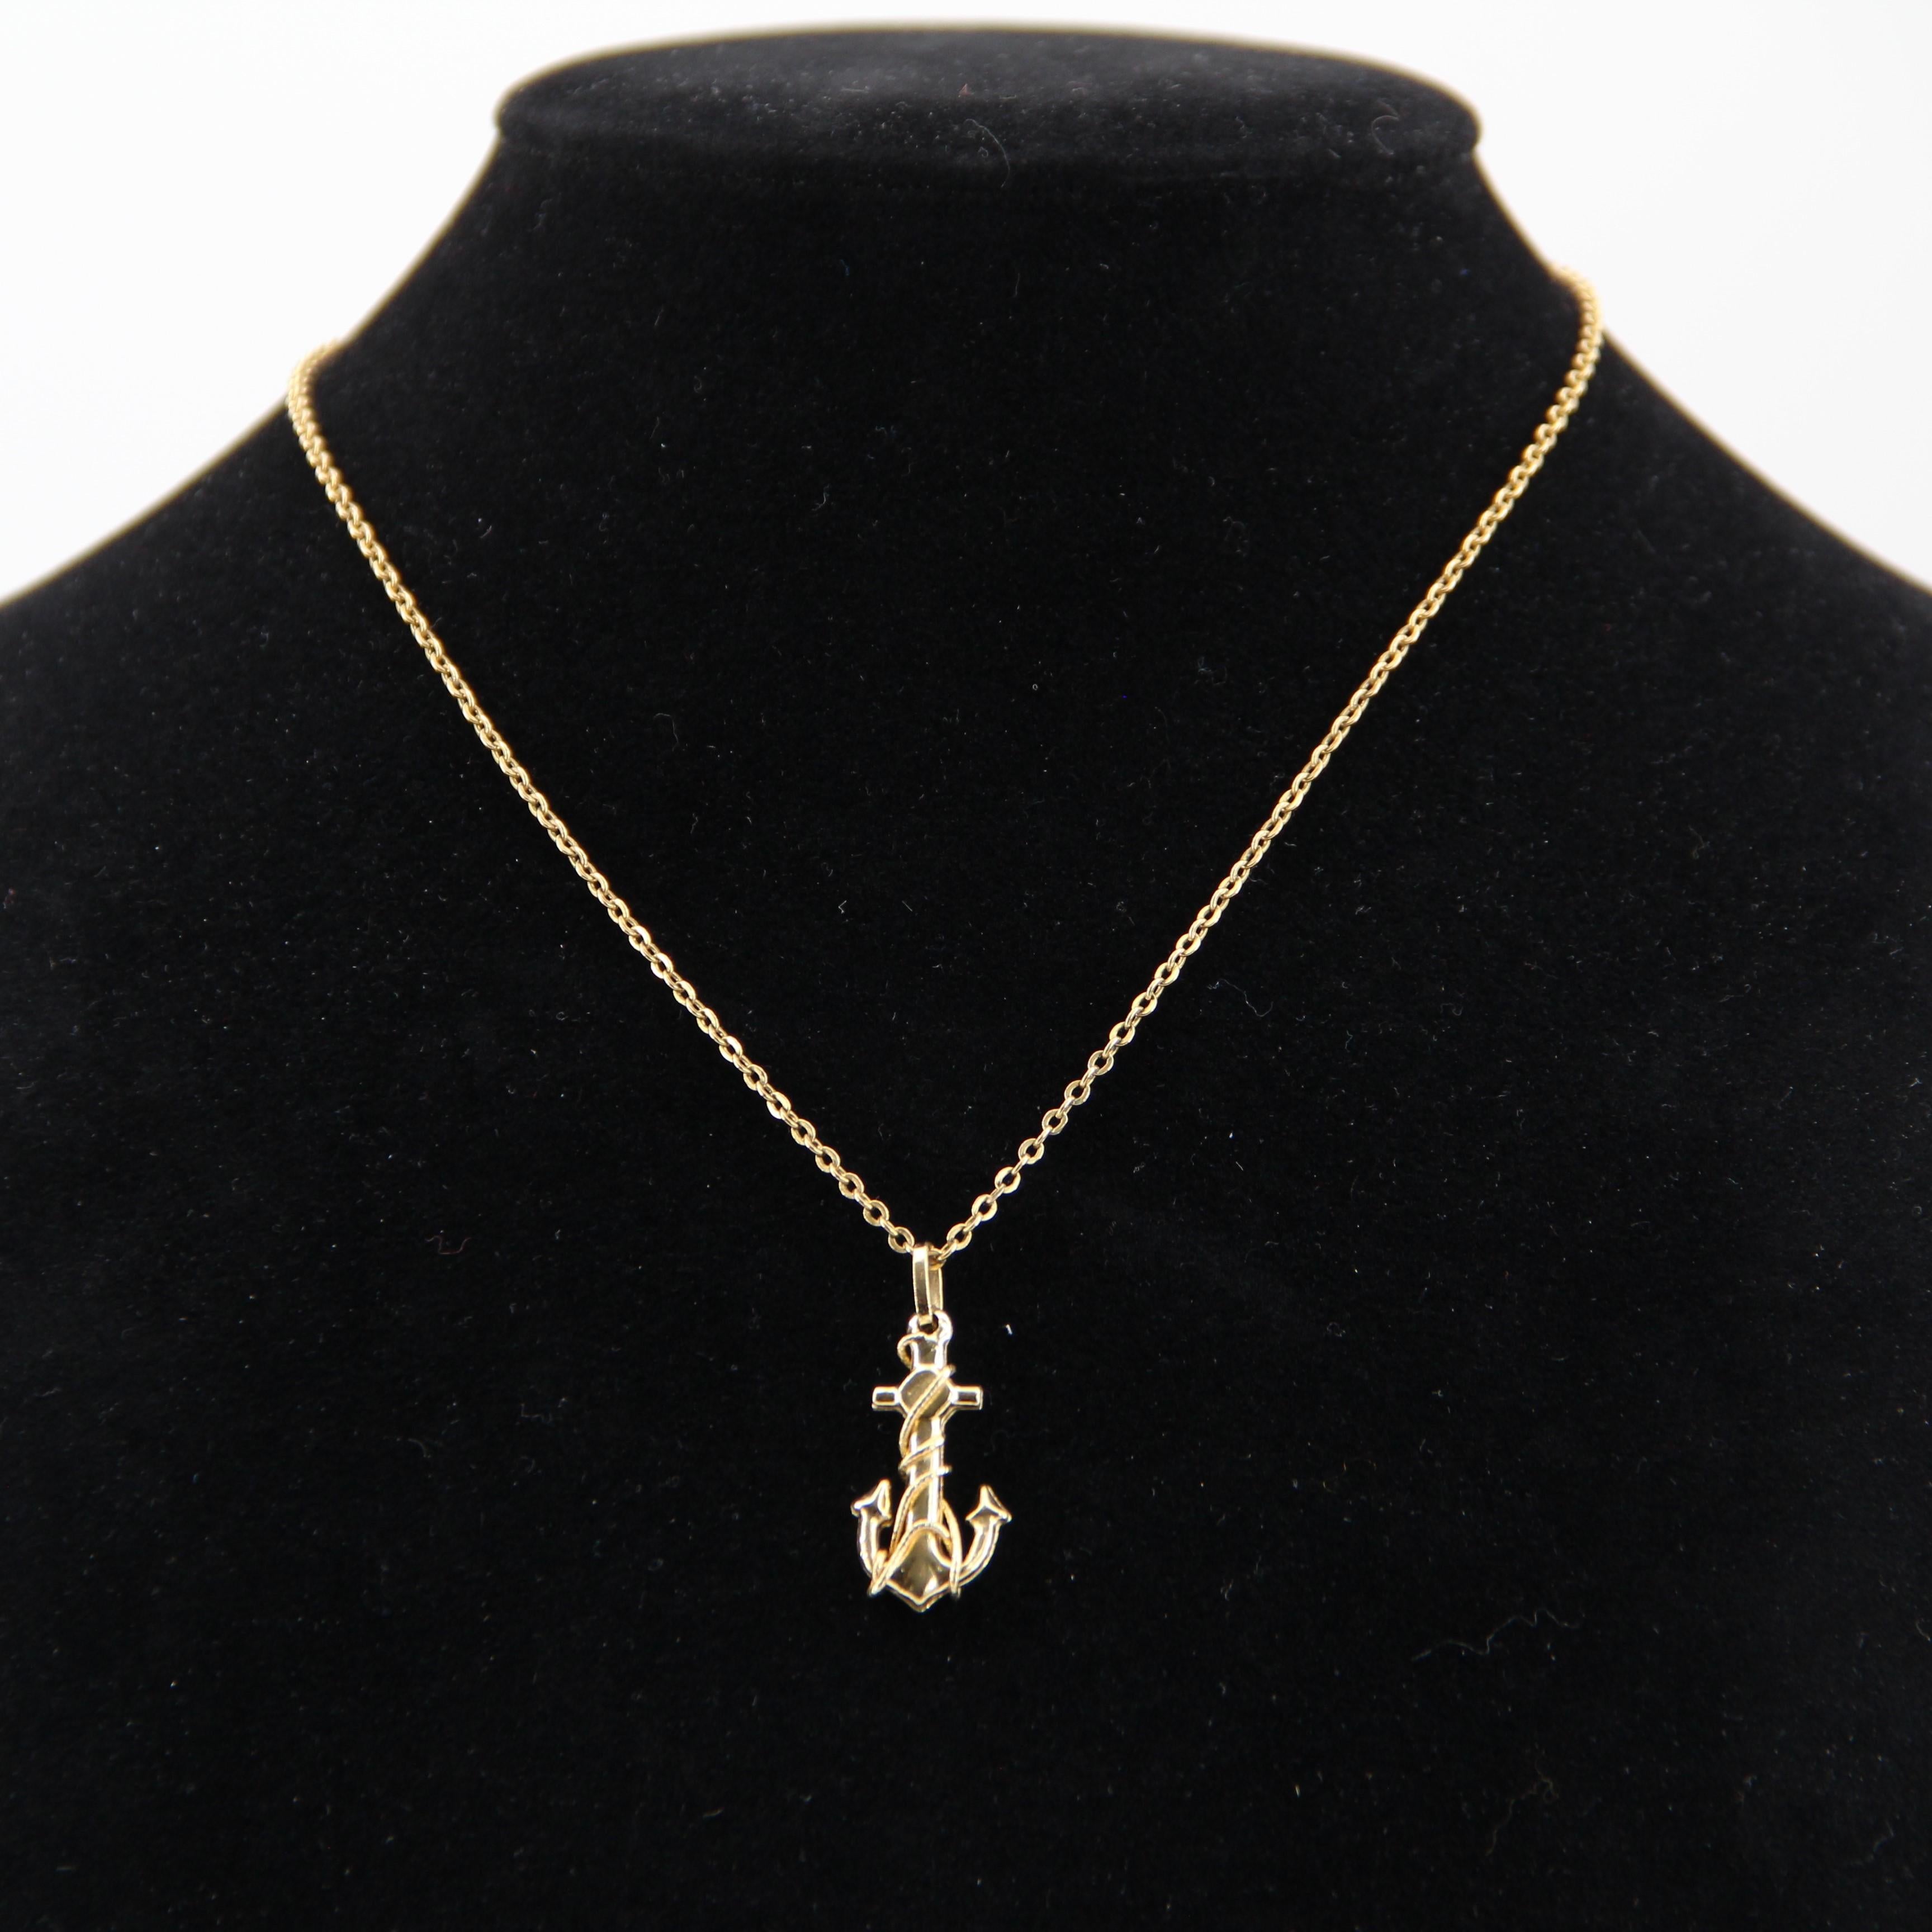 Pendant in 18 karat yellow gold.
This retro pendant is in the shape of an anchor with its knotted rope.
Height : 3 cm, width : 1,2 cm, thickness : 3,7 mm approximately.
Total weight of the jewel : 1,8 g approximately.
Authentic antique jewelry -